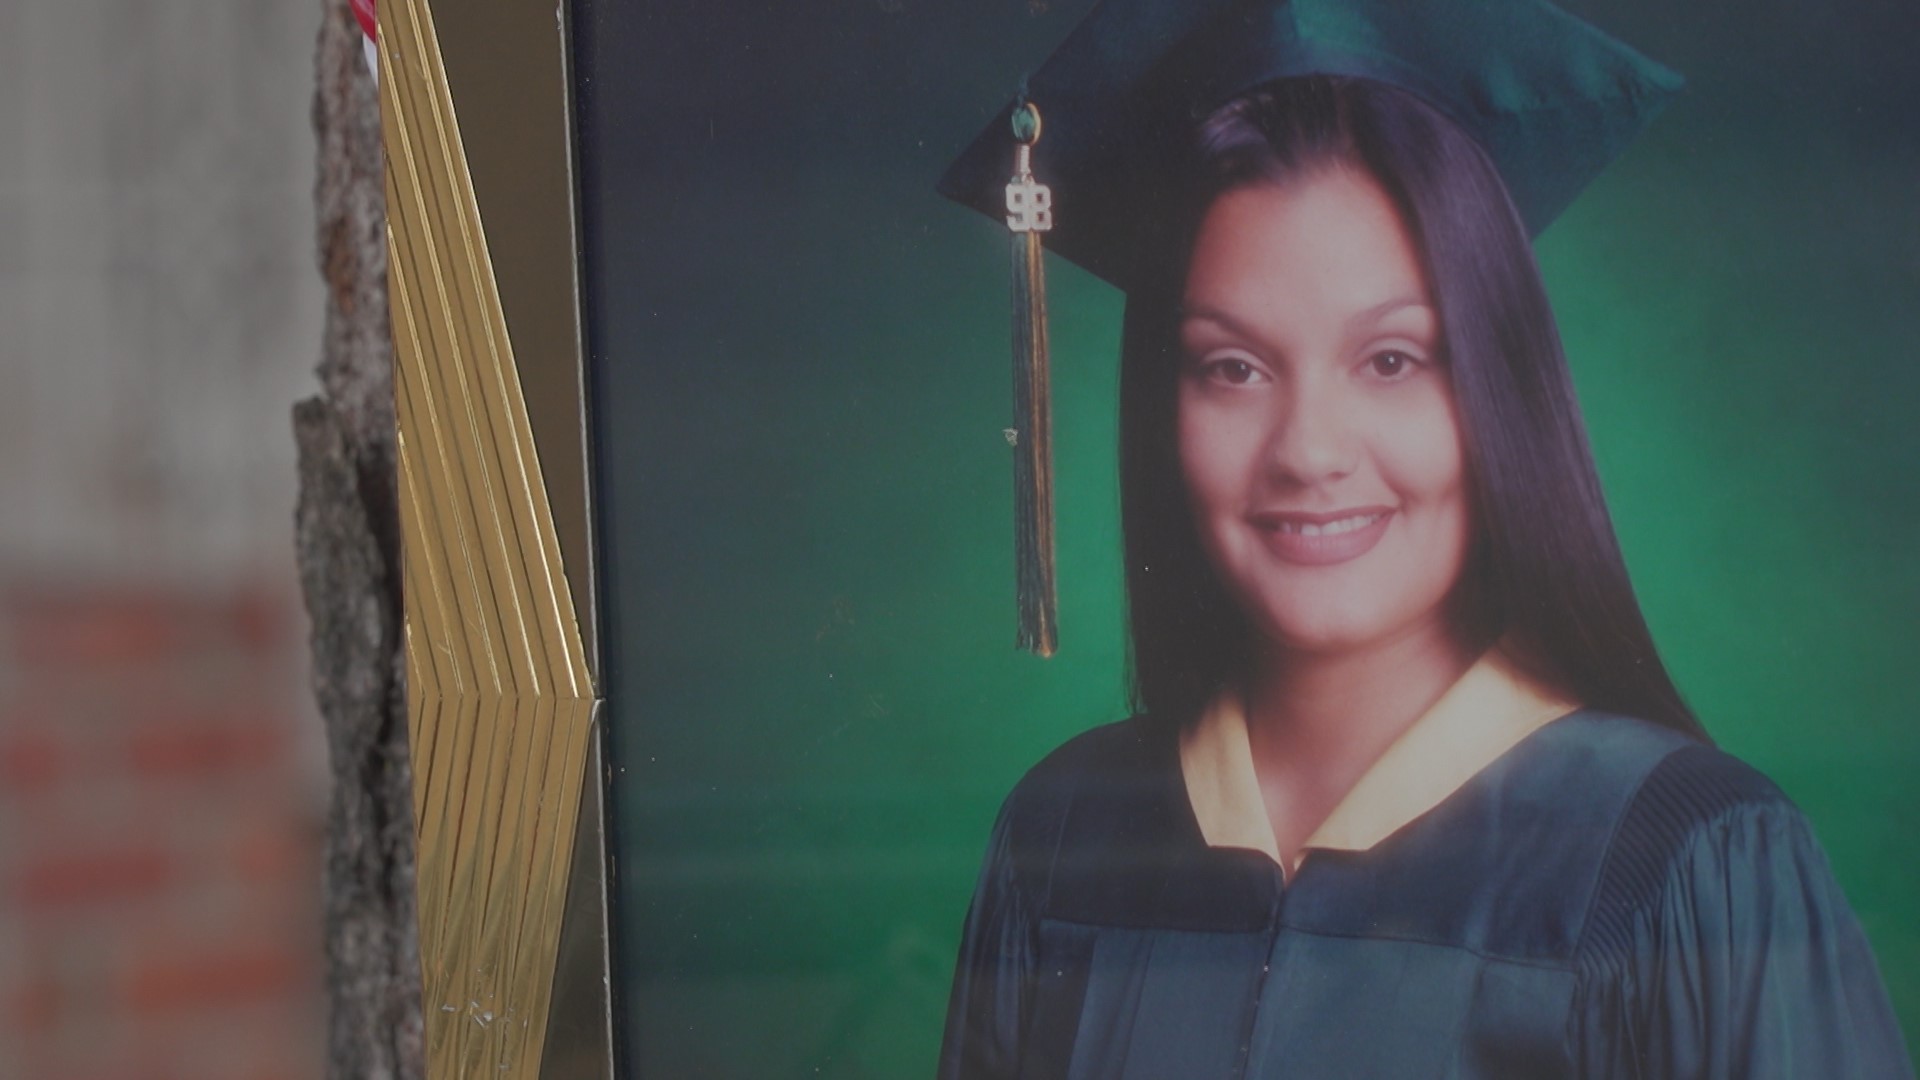 Sophia Ulloa was murdered 20 years ago next to her car full of Christmas presents for her 4-year-old daughter. Her murder has gone unsolved.